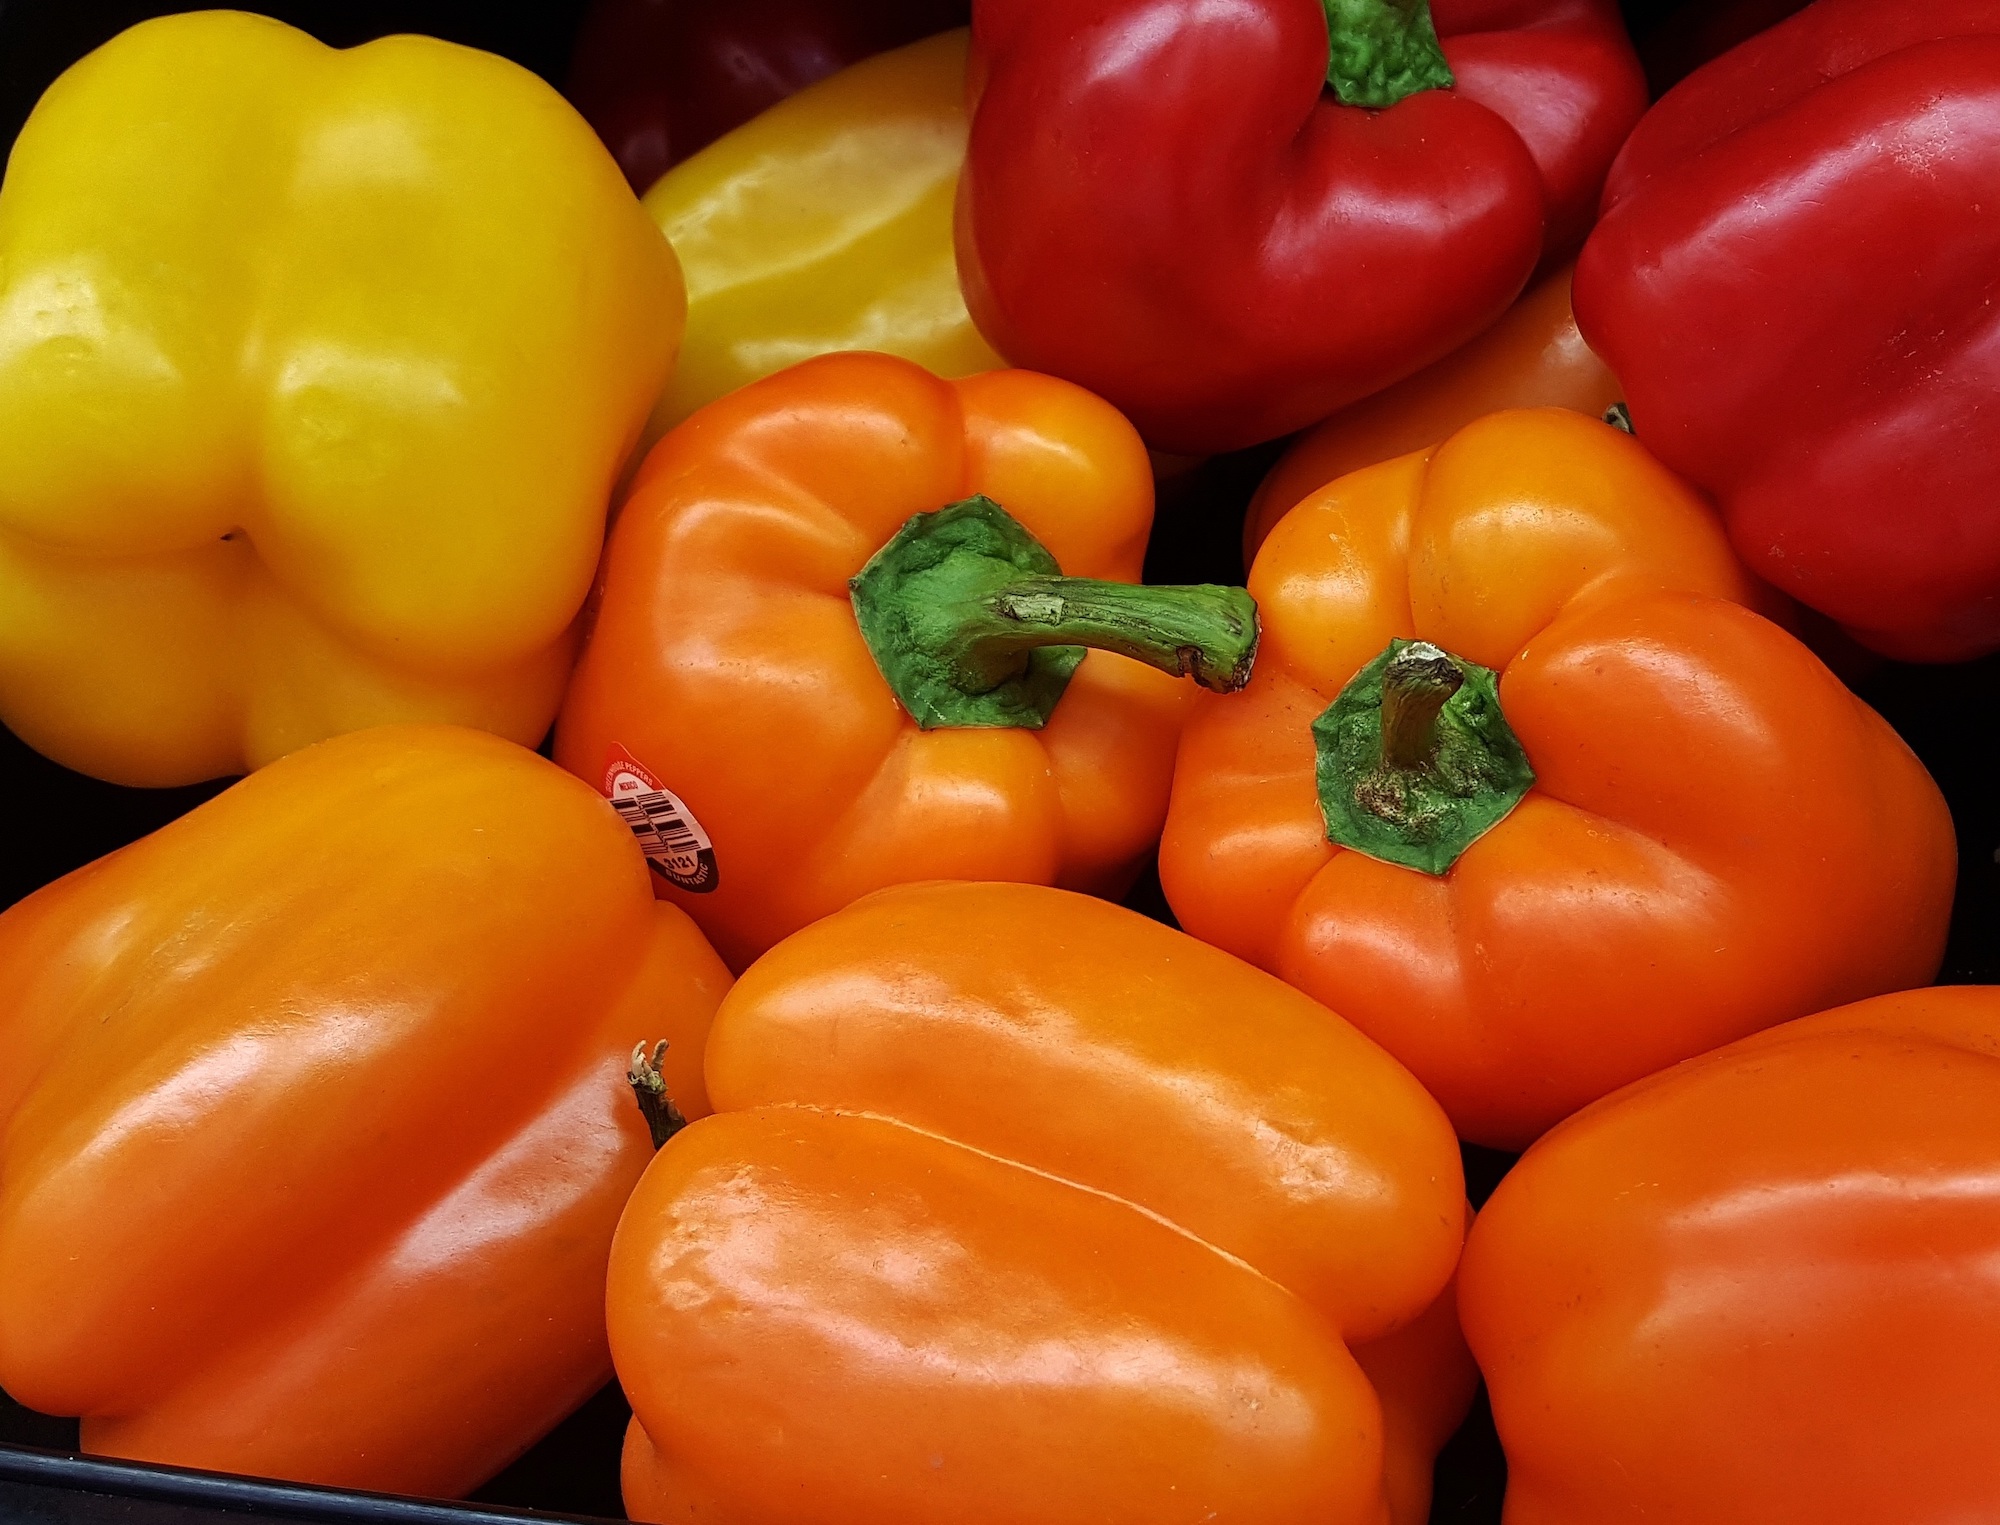 How to store peppers